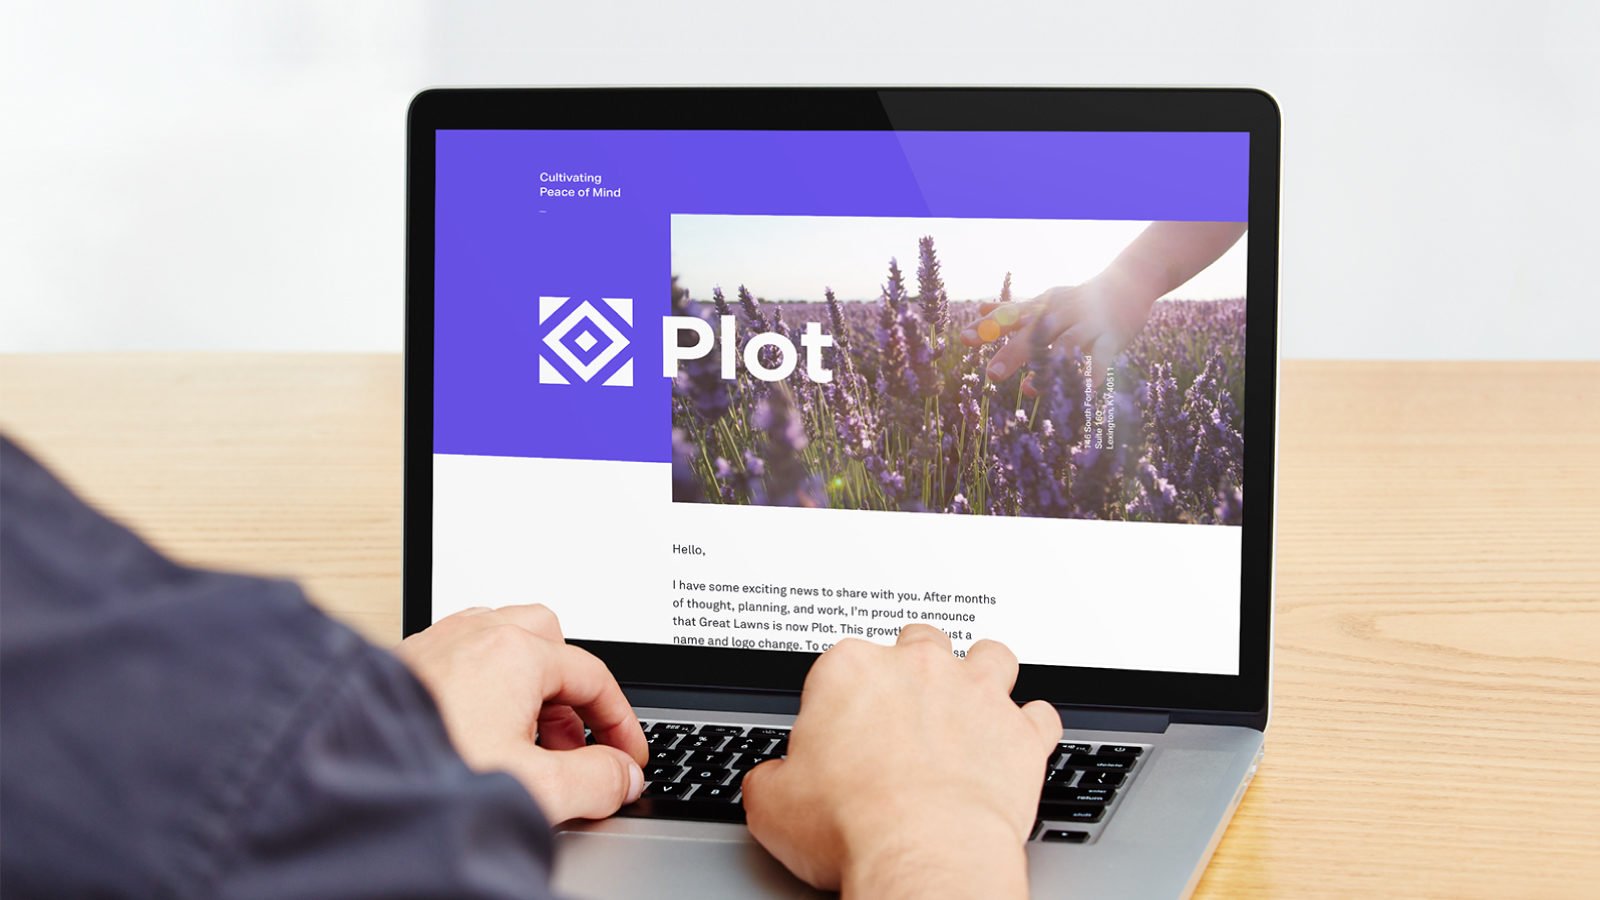 A Brand Identity for Plot Landscaping by Bullhorn Creative